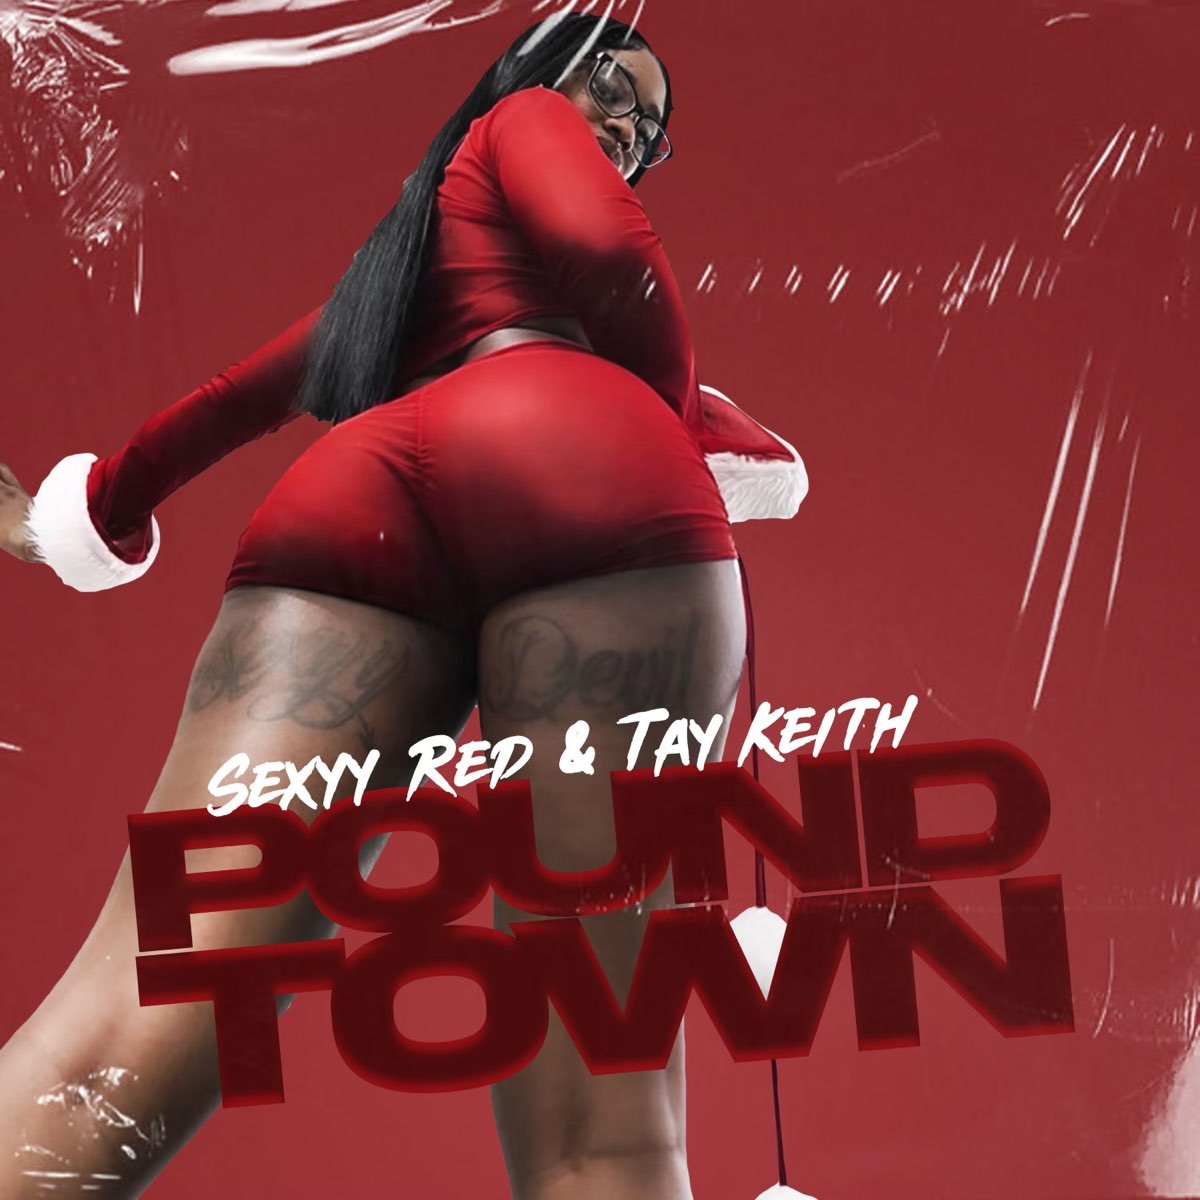 ‎pound Town Single By Sexyy Red And Tay Keith On Apple Music 